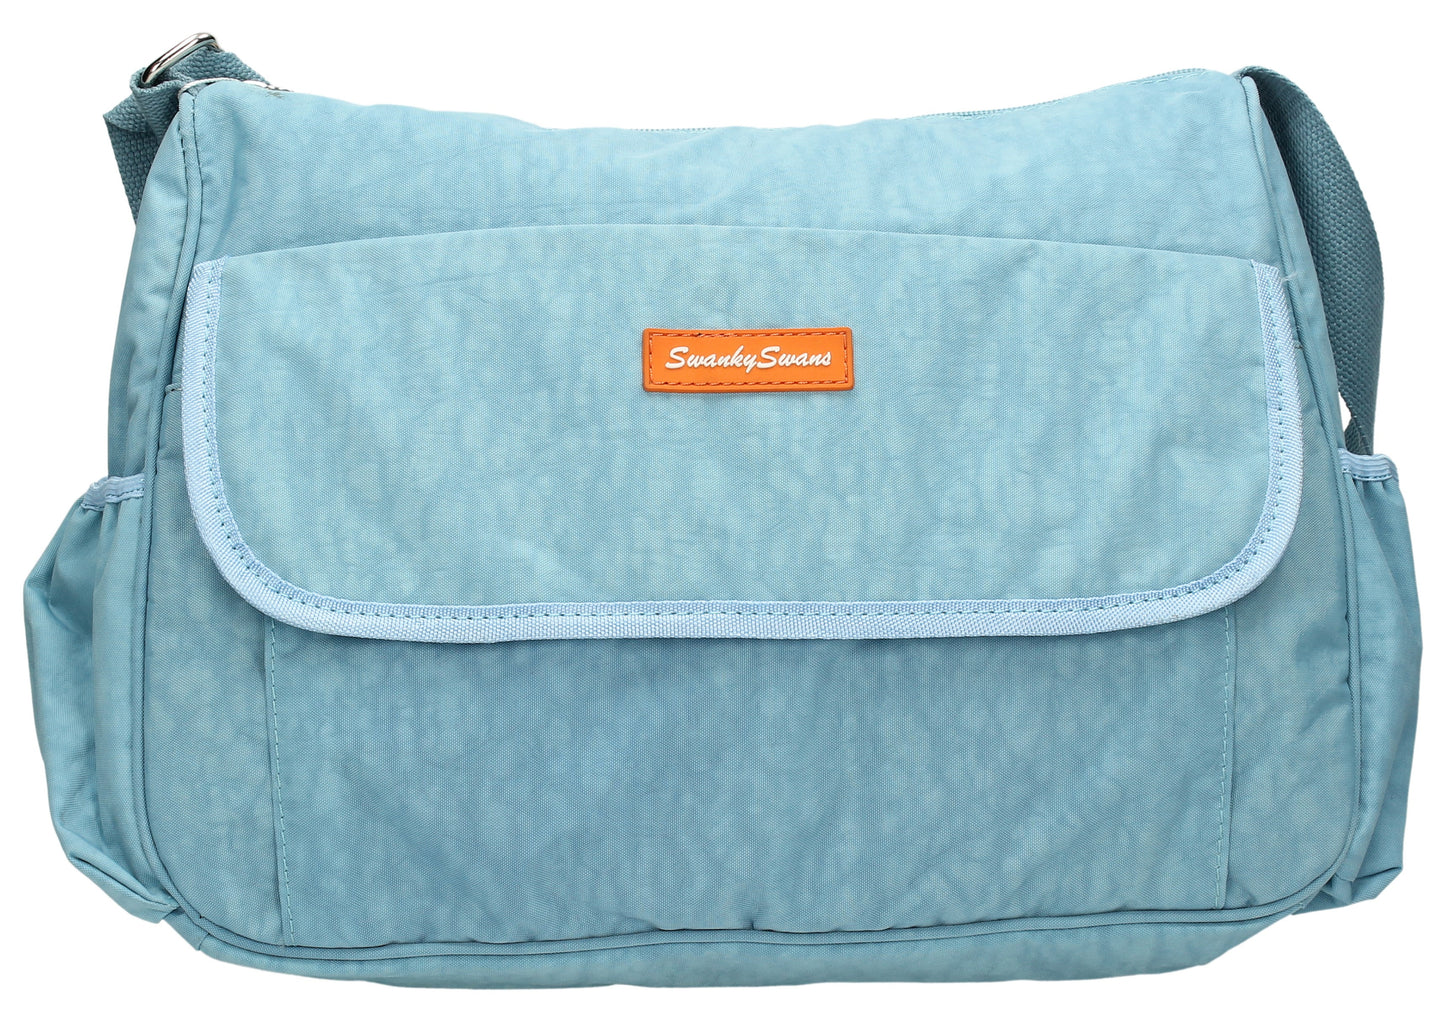 Joseph and Mary Baby Changing Satchel - Light Blue-Baby Changing-SWANKYSWANS